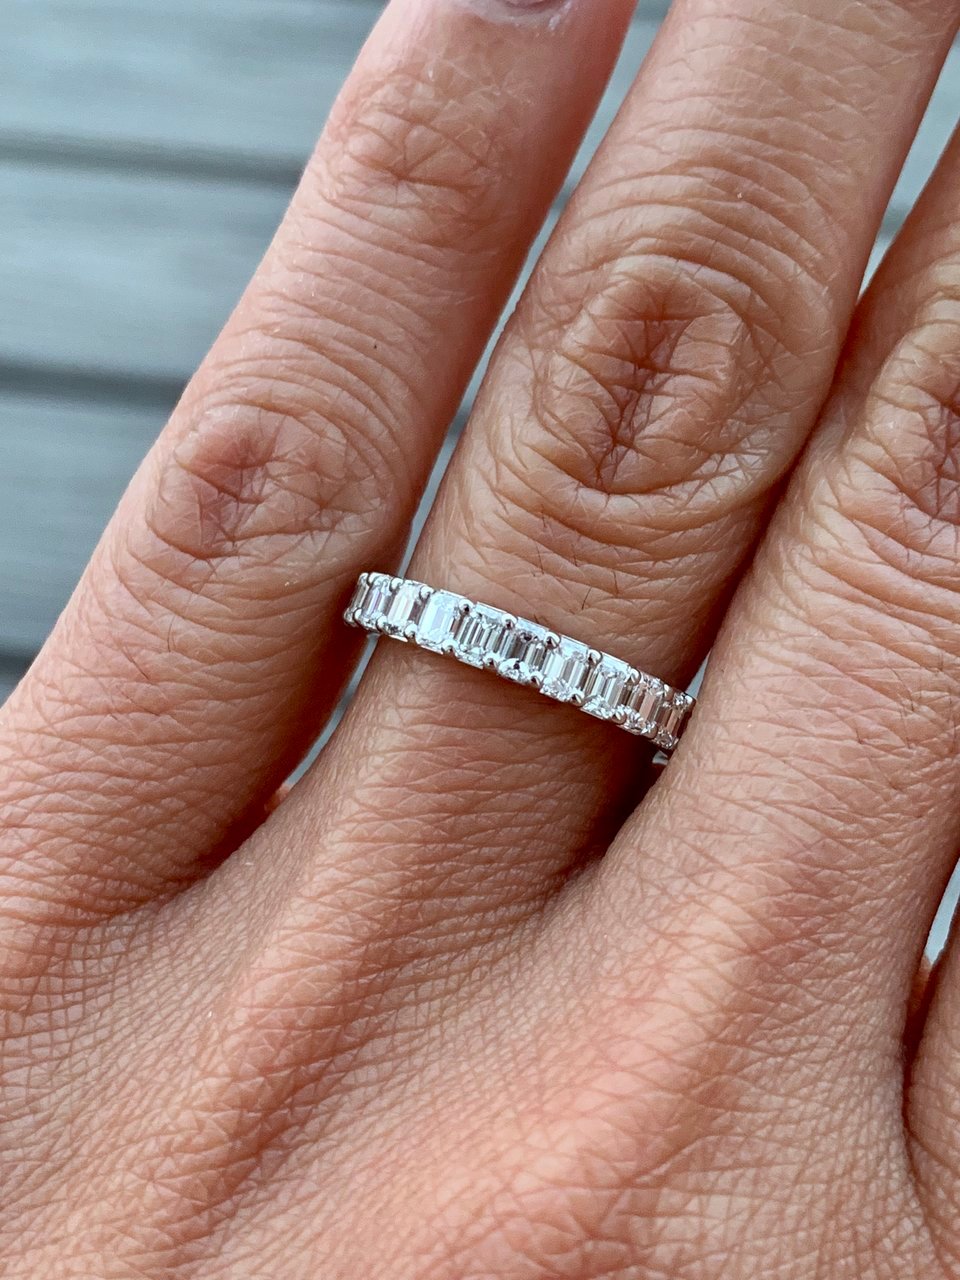 Eli22 posted this gorgeous emerald cut eternity ring on the Show Me the Bling forum at PriceScope. I love an eternity ring (who doesn’t), and this is a fantastic example of the style!